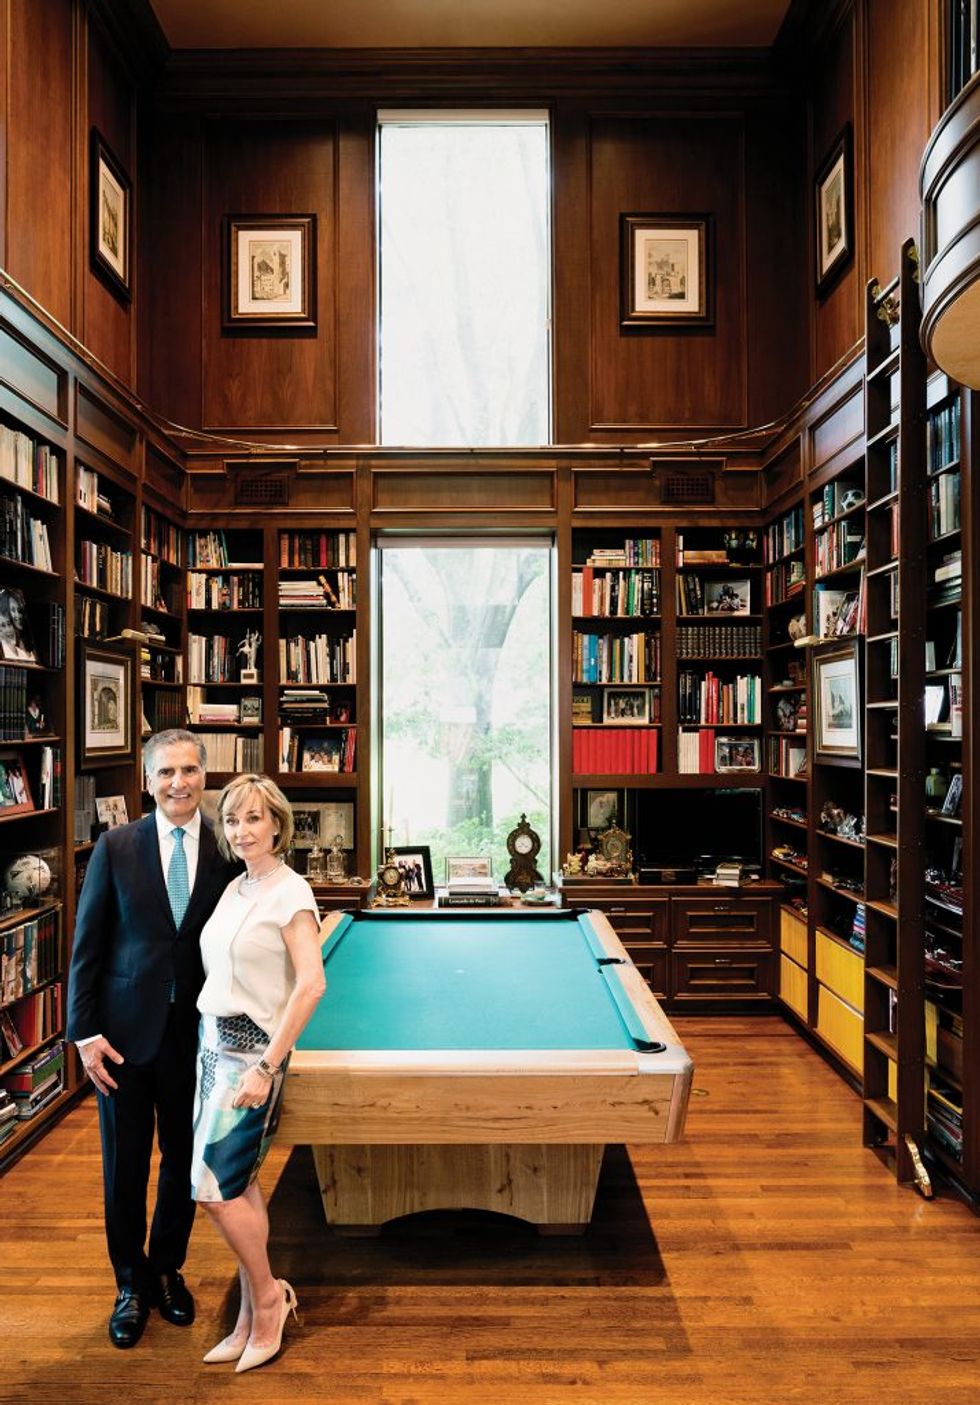 Giorgio and Cathy Borlenghi in their traditionally designed 6,000-square-foot Stablewood manse